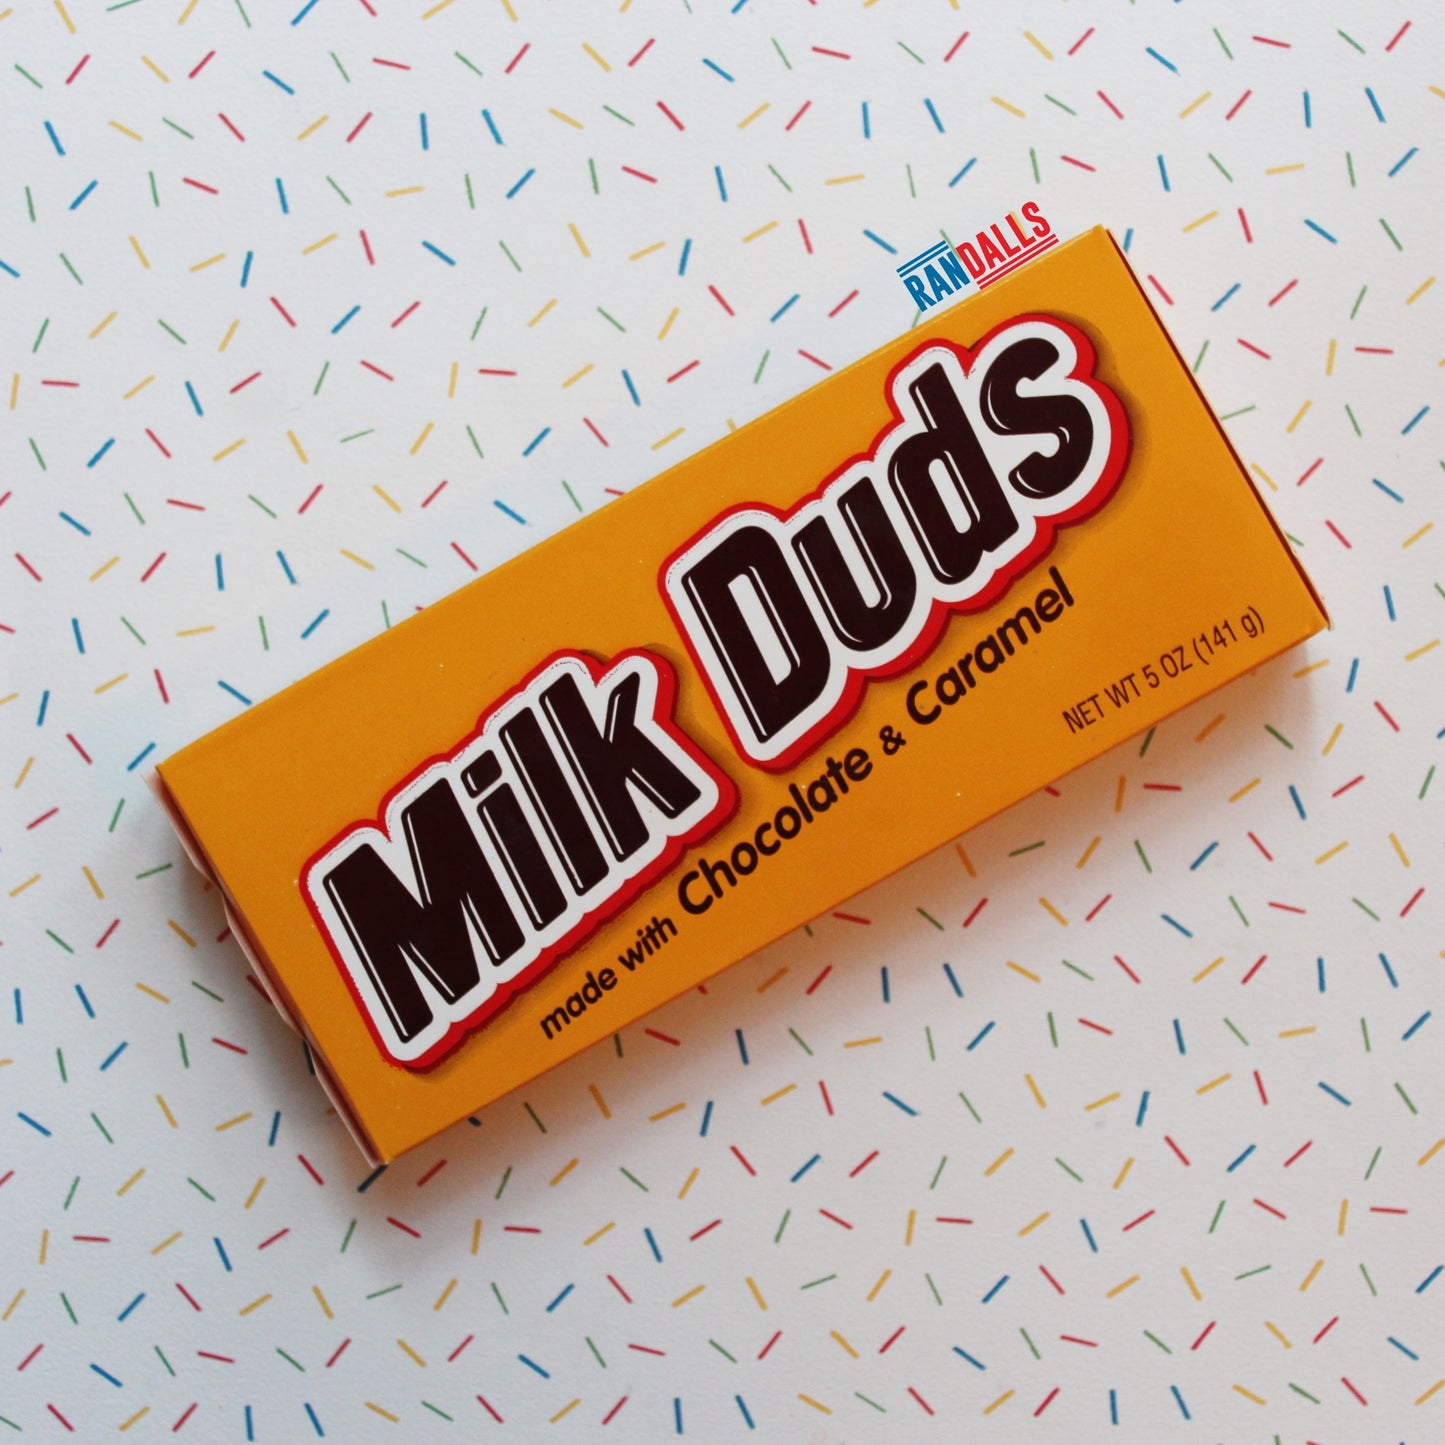 milk duds box, chocolate, caramel pieces, fudge, chewy, sweets, candy, usa, randalls